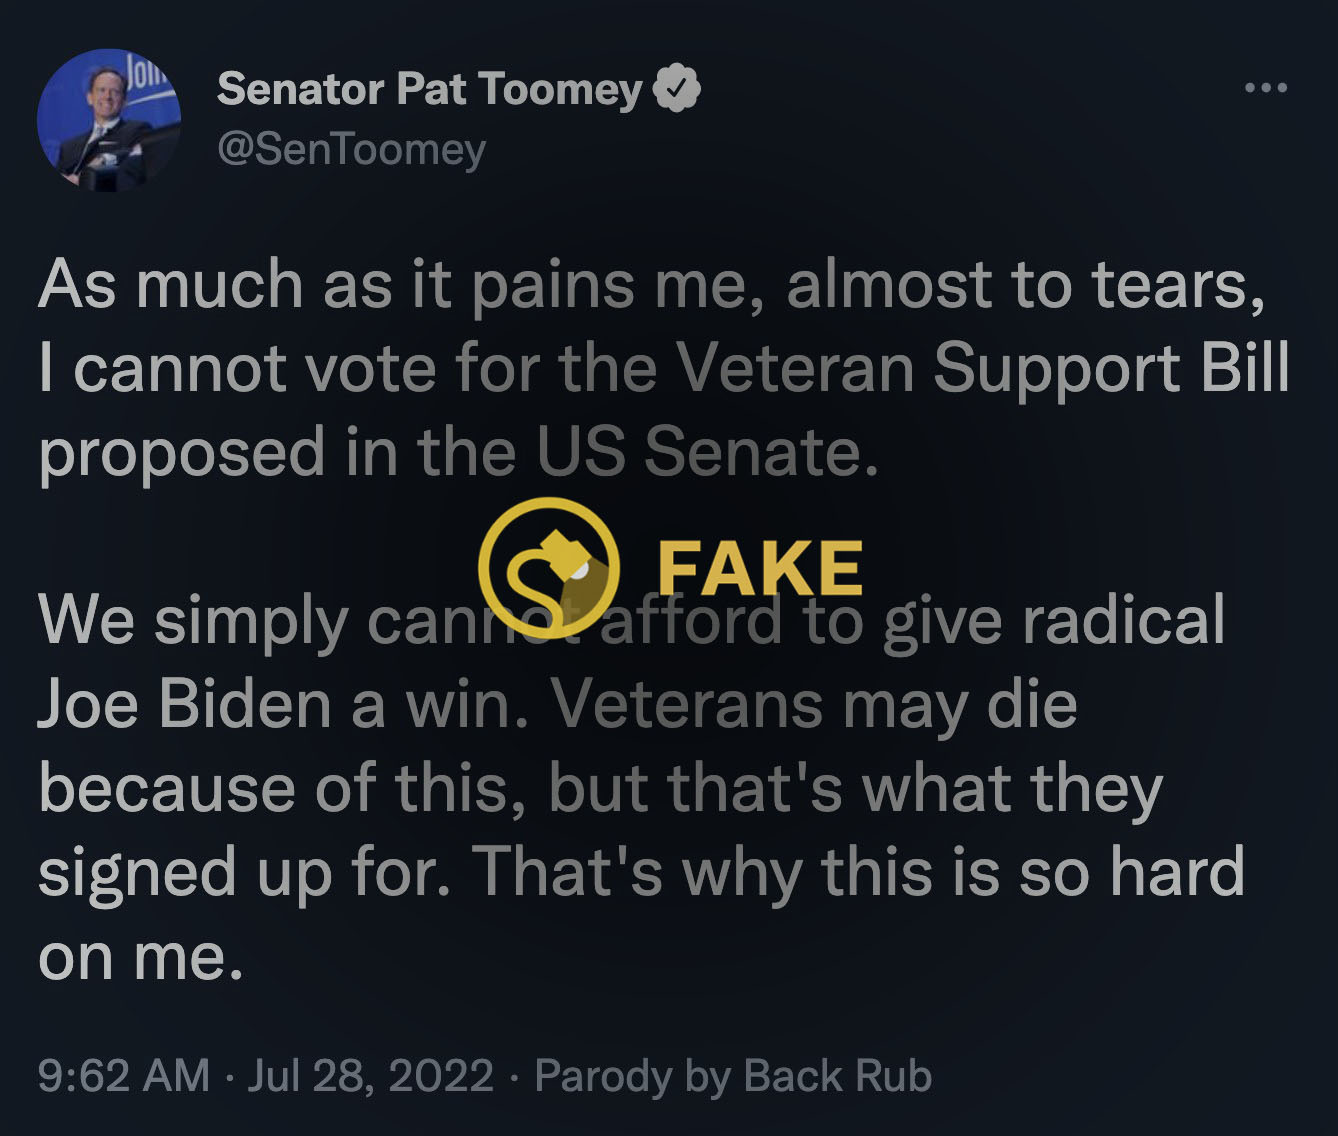 Pat Toomey did not tweet of a veteran support bill, "We simply cannot afford to give Joe Biden a win, or that, "Veterans may die because of this but that's what they signed up for."